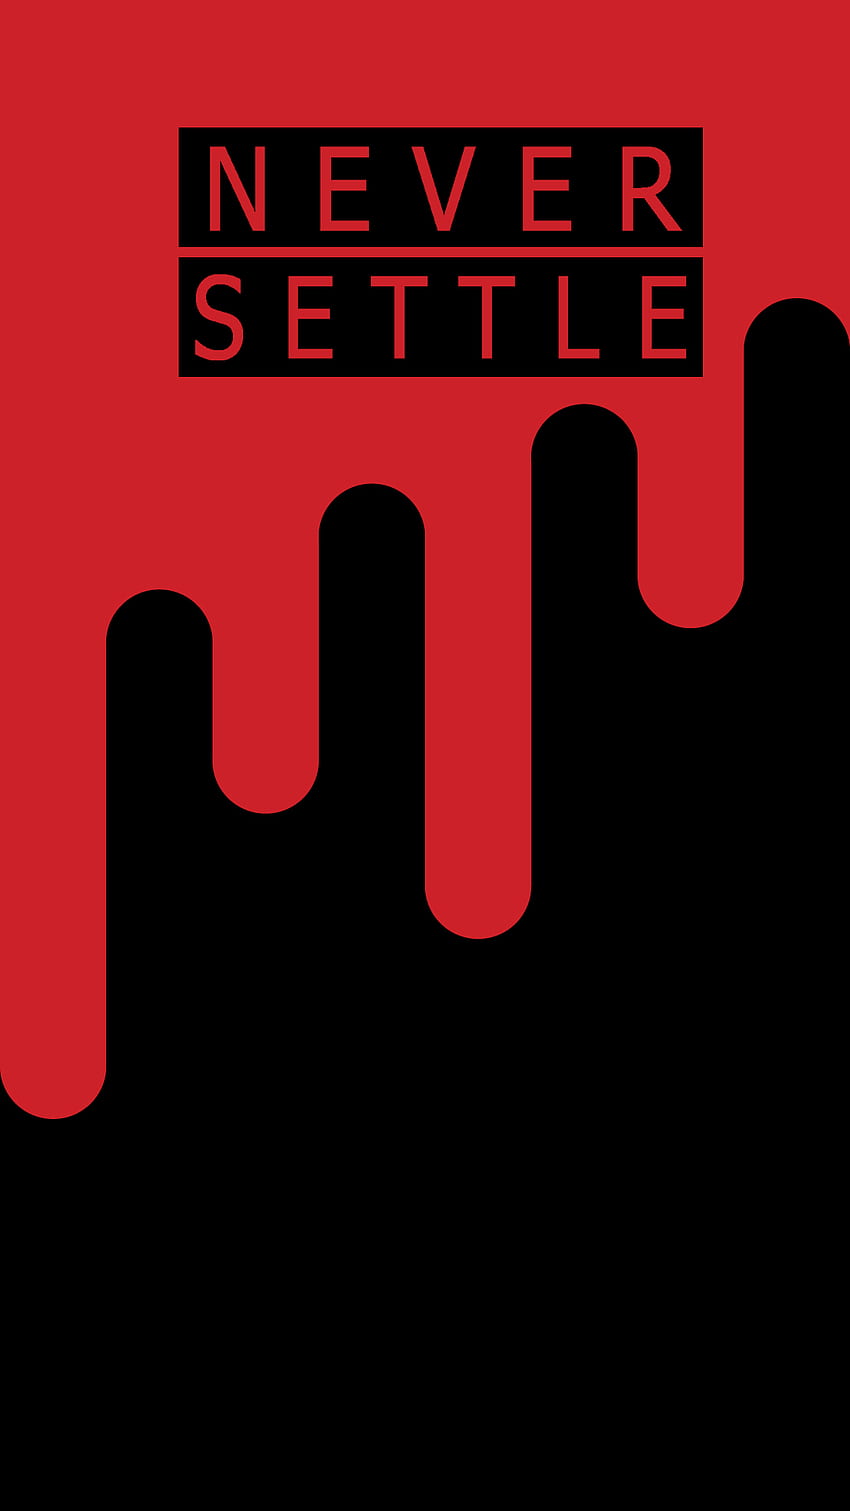 Download Oneplus Nord Never Settle Lettering Wallpaper | Wallpapers.com